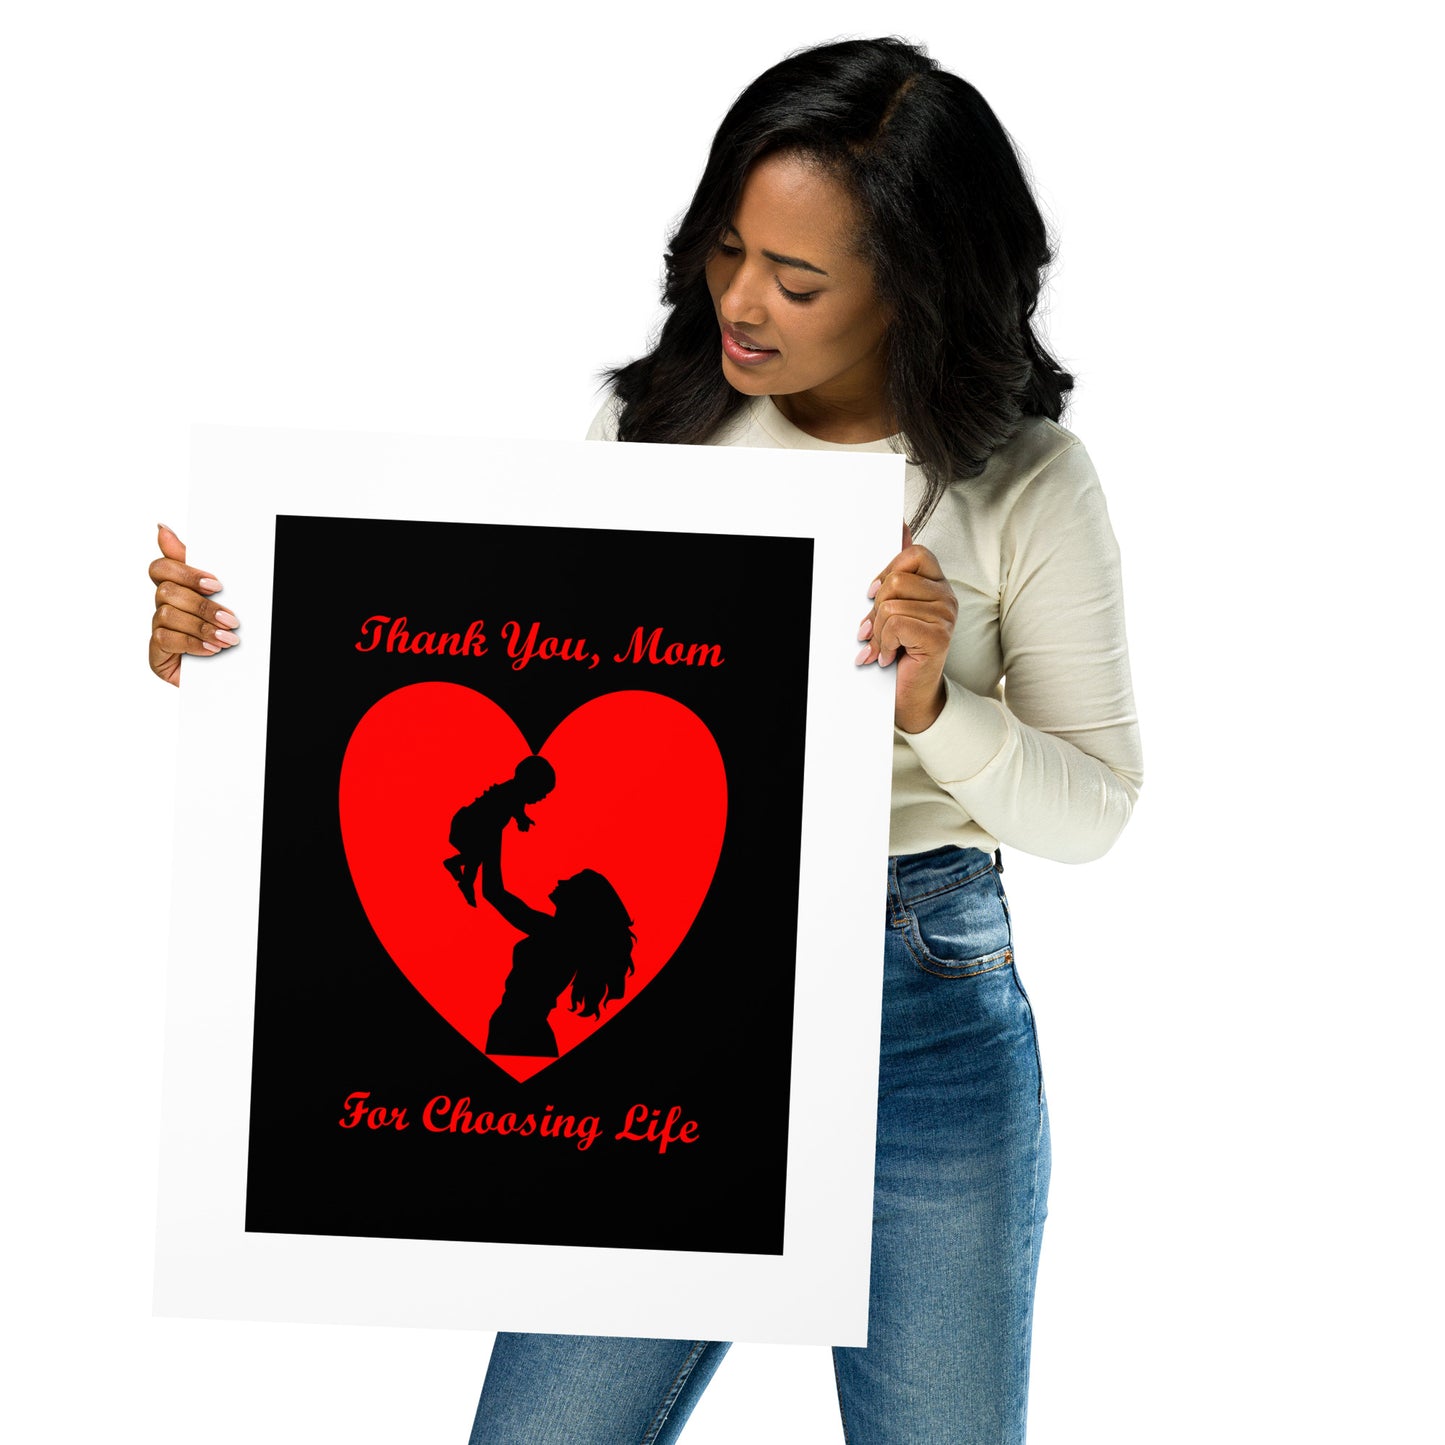 A002 Art Print - Museum Quality Giclée Print Featuring Mother and Baby Graphic with text “Thank You, Mom For Choosing Life.”